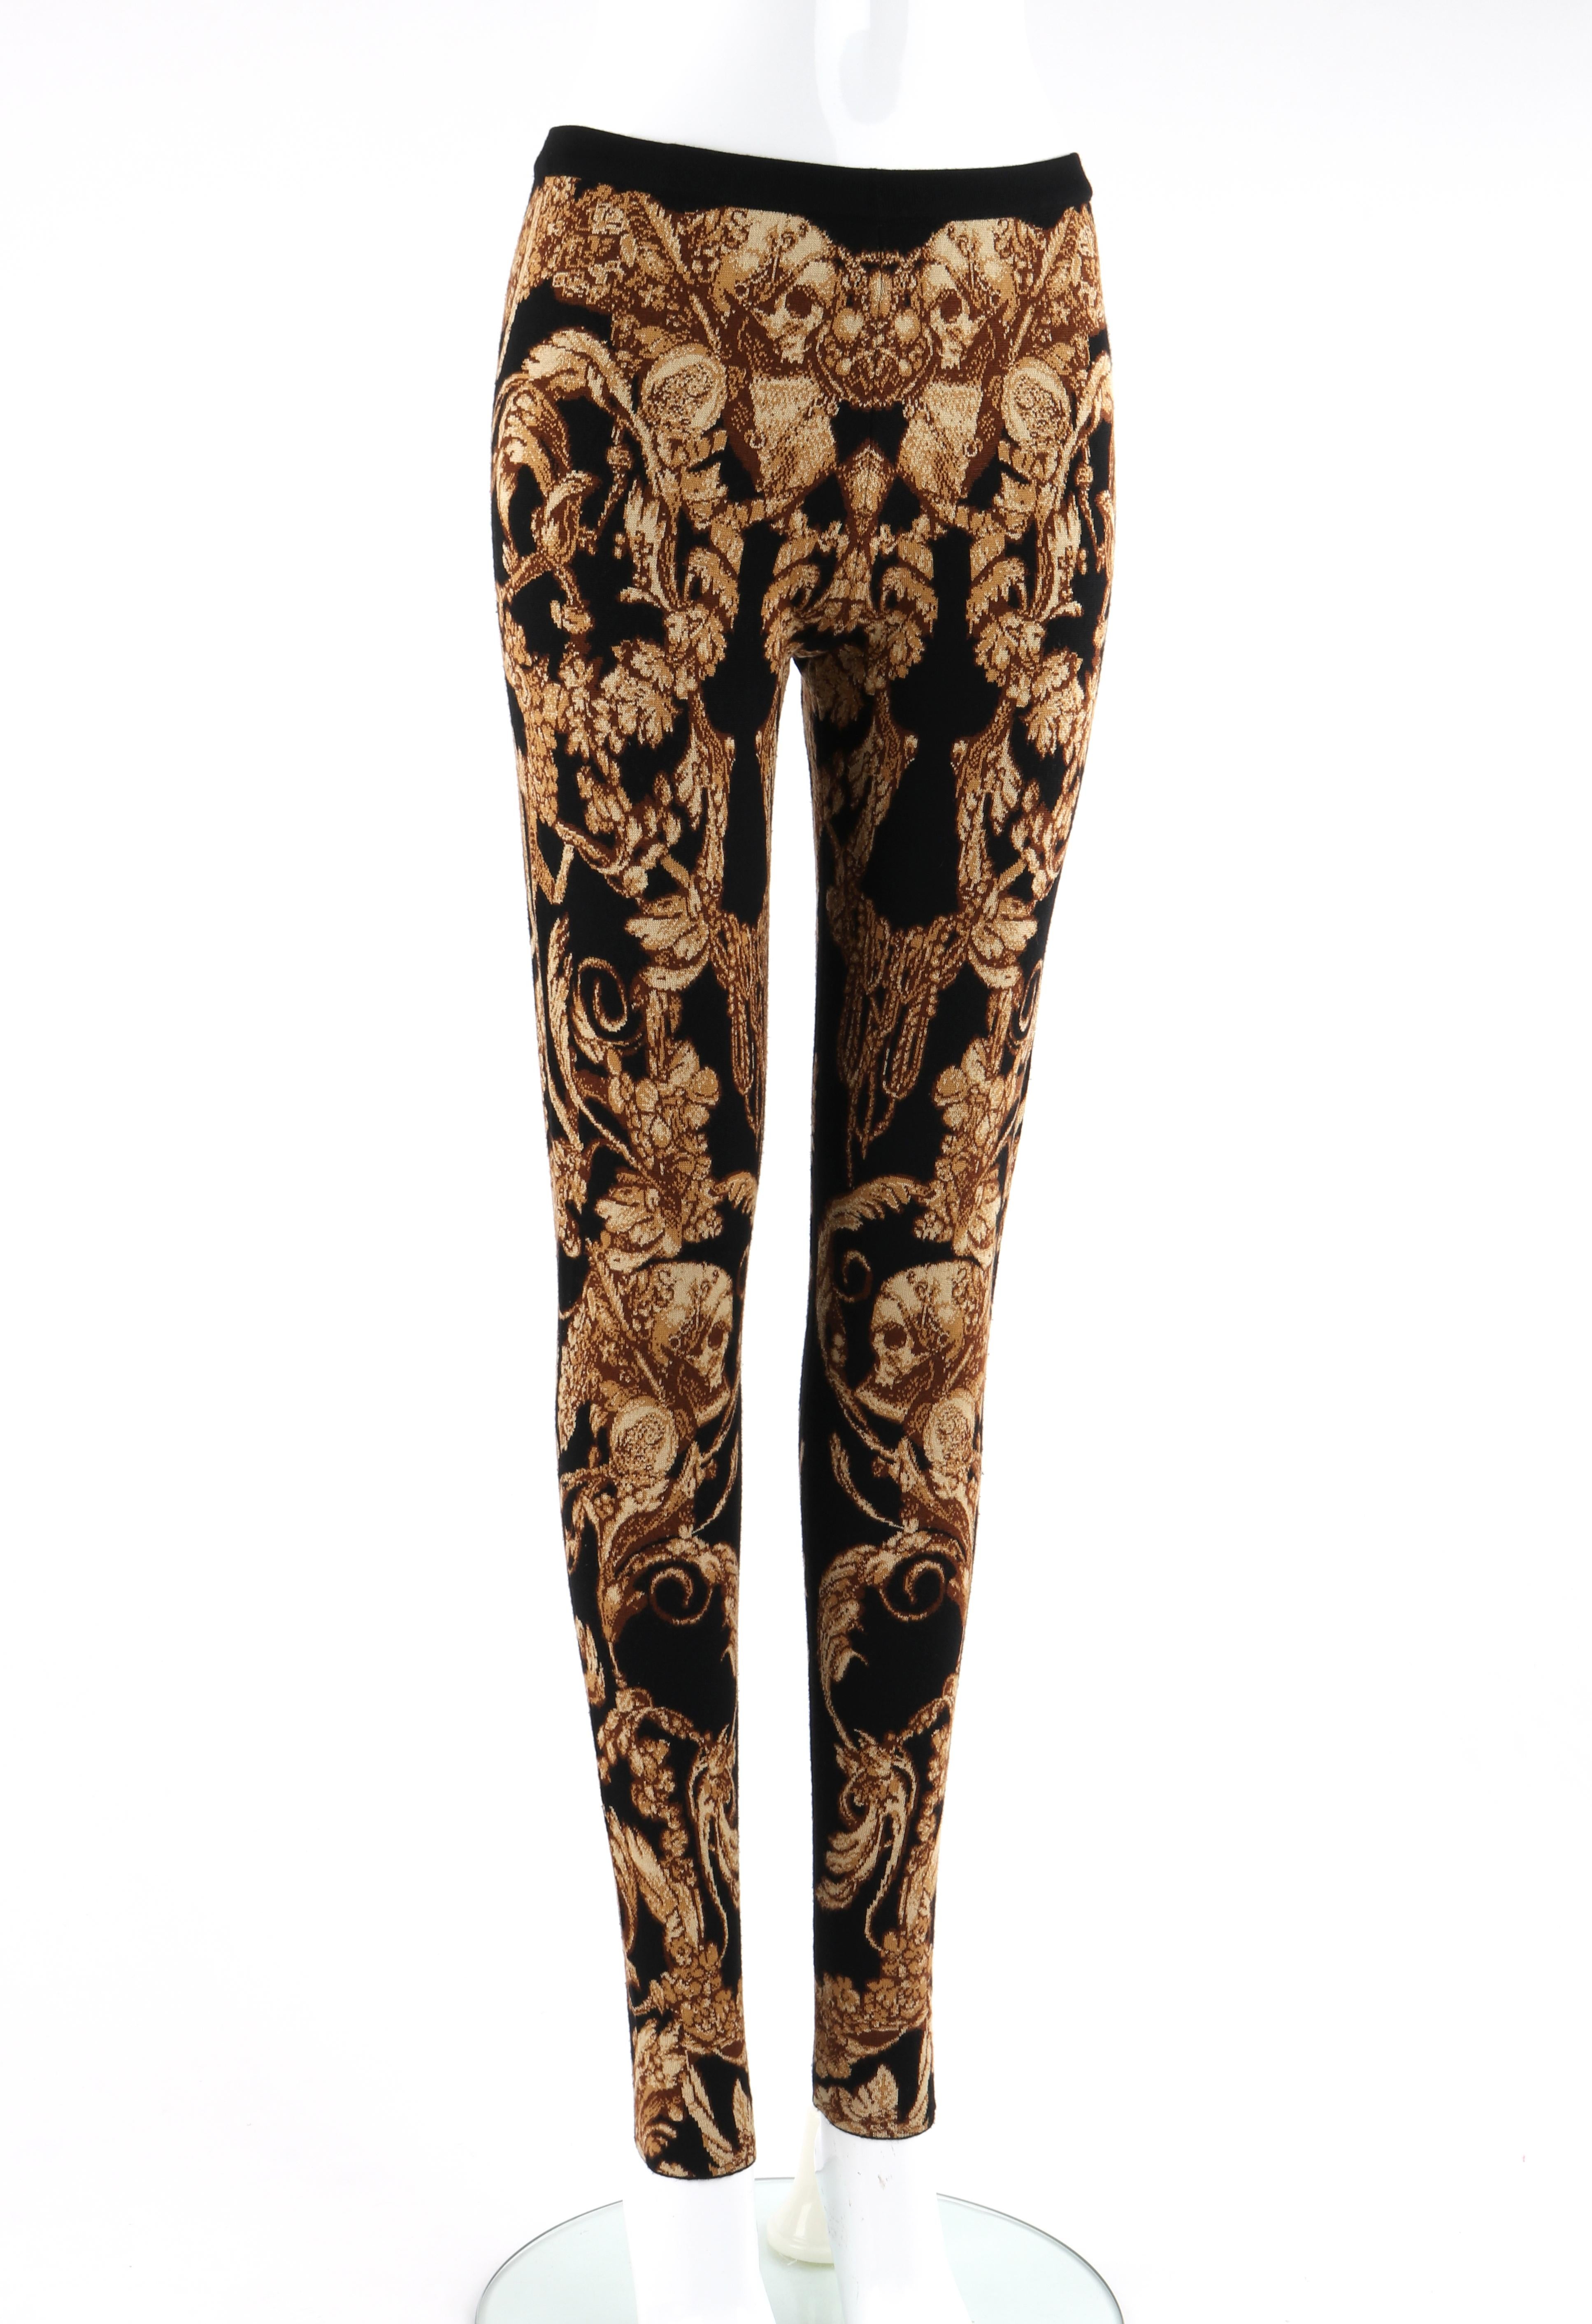 ALEXANDER McQUEEN A/W 2010 “Angels & Demons” Grinling Gibbons Knit Leggings

Brand / Manufacturer: Alexander McQueen
Collection: A/W 2010 “Angels & Demons”
Designer: Alexander McQueen
Style: Legging
Color(s): Shades of black, cream, and brown
Lined: